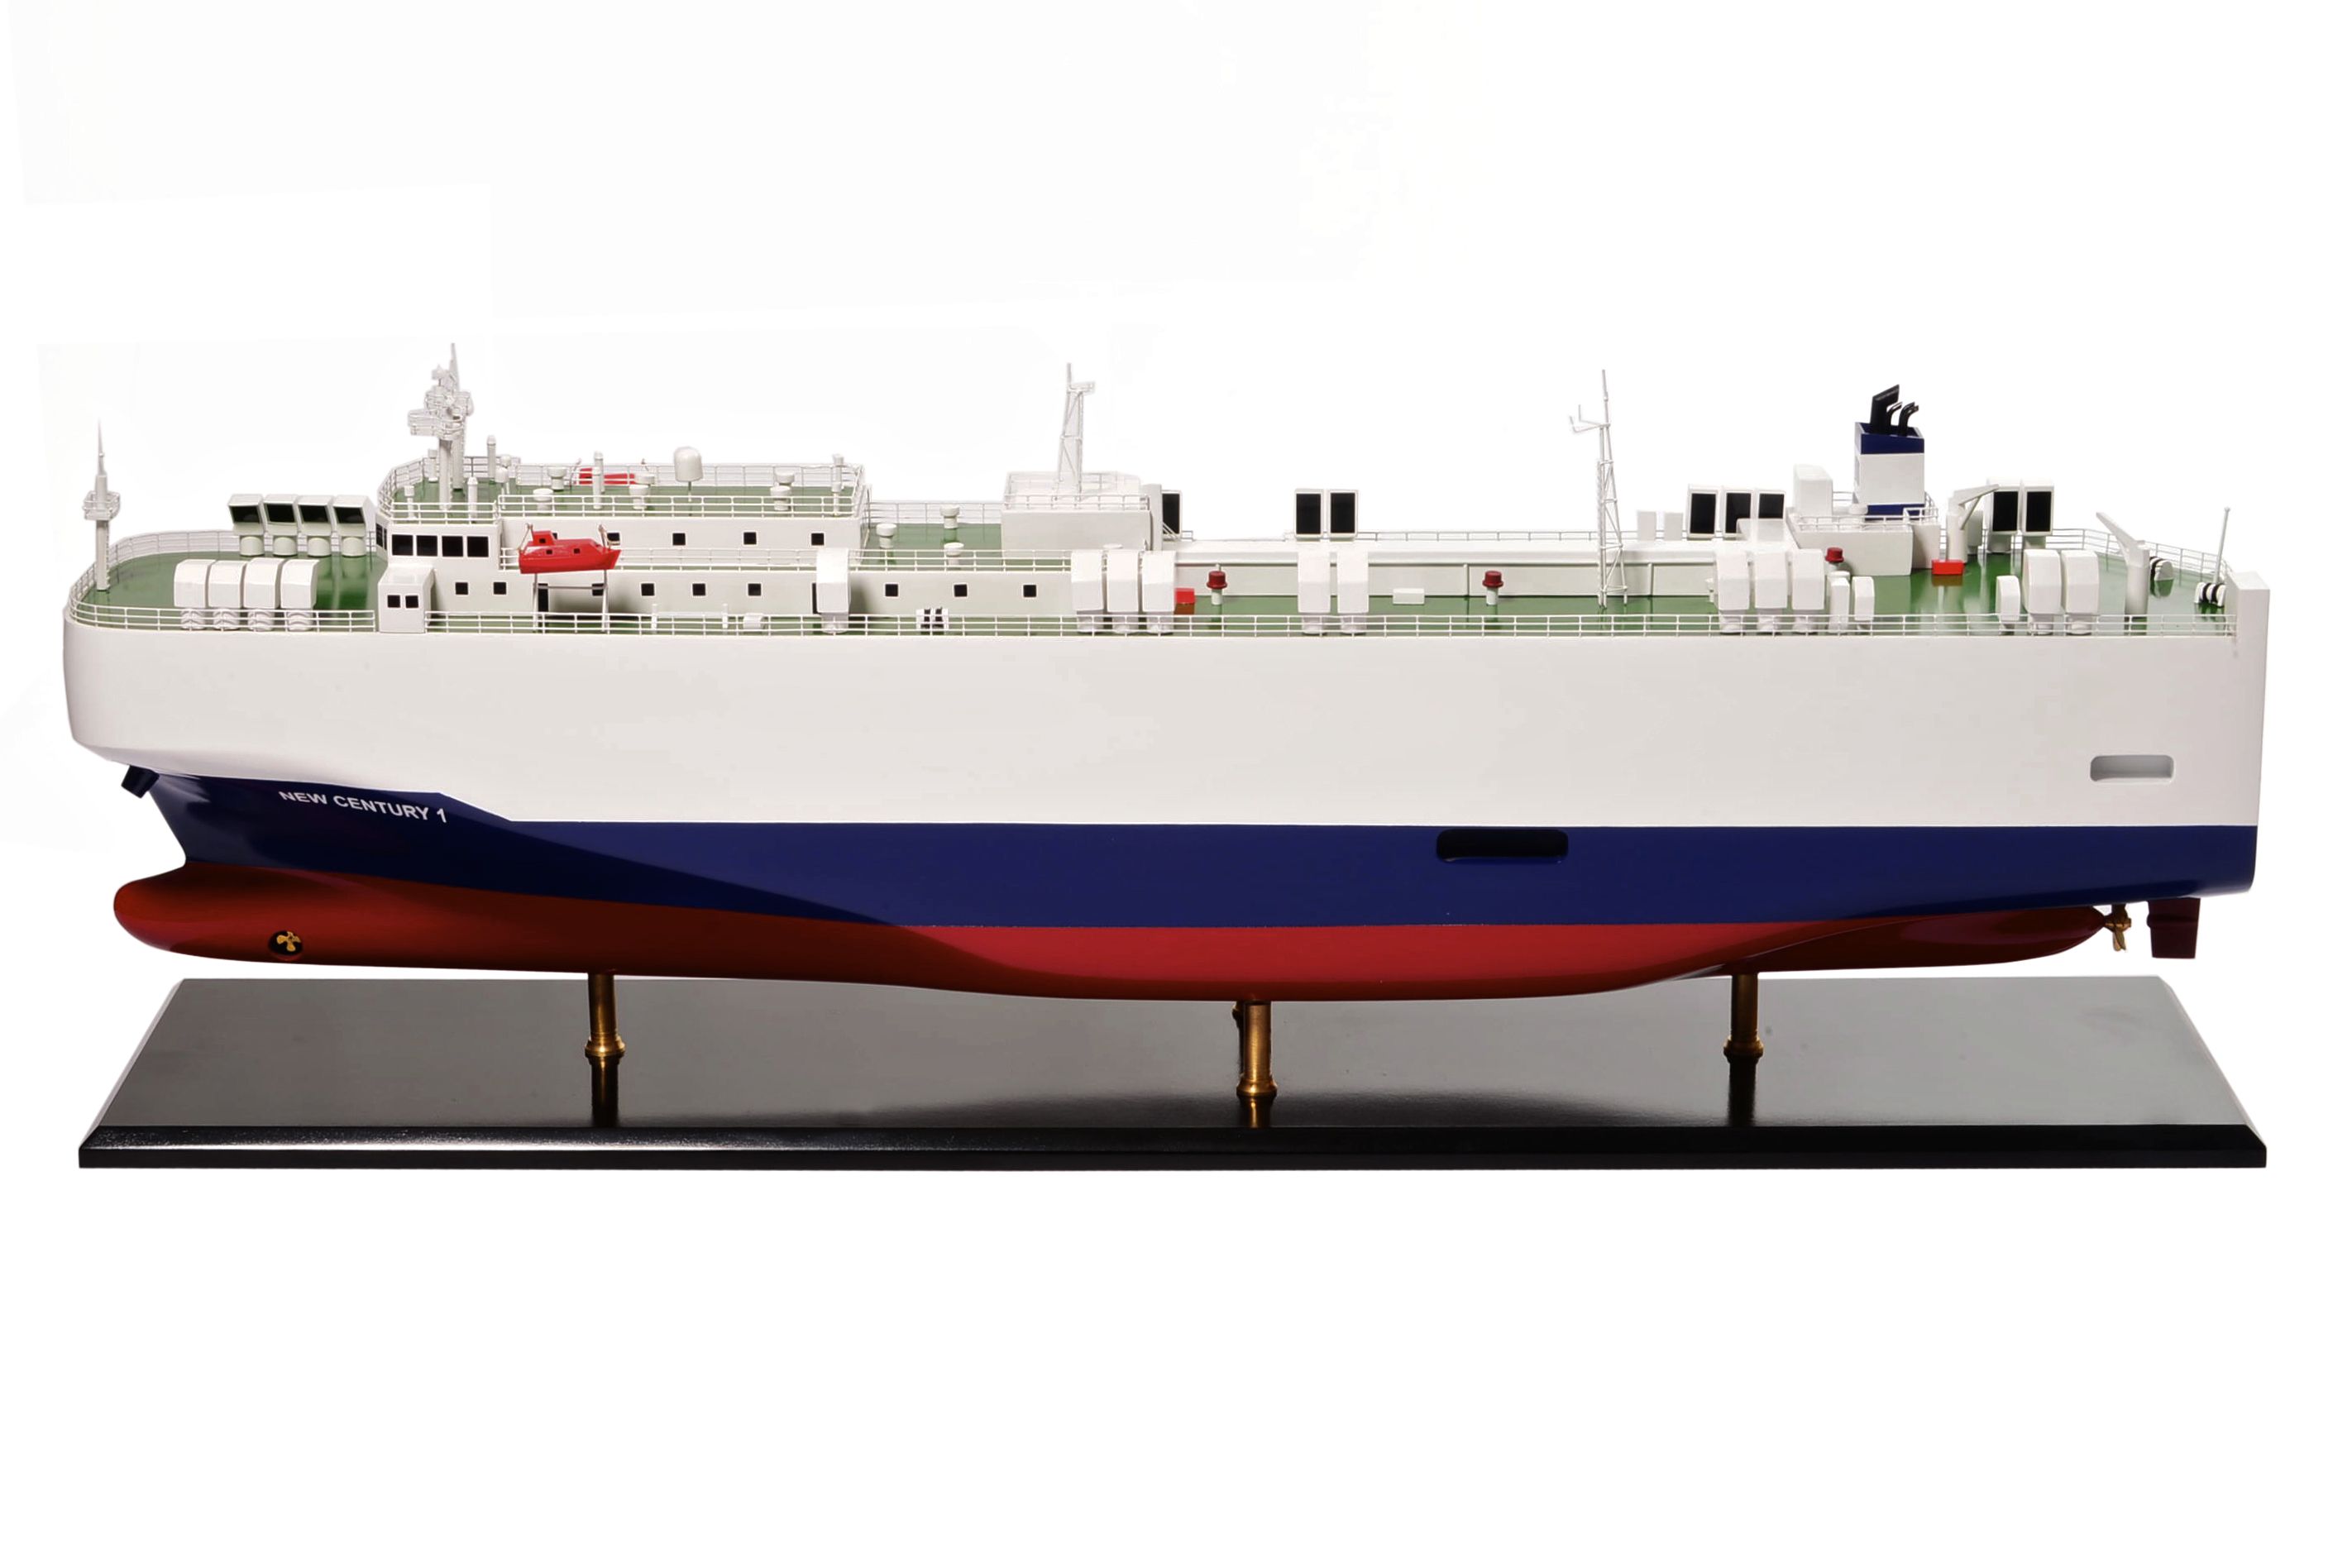 New Century 1 Vehicle Carrier Model Ship